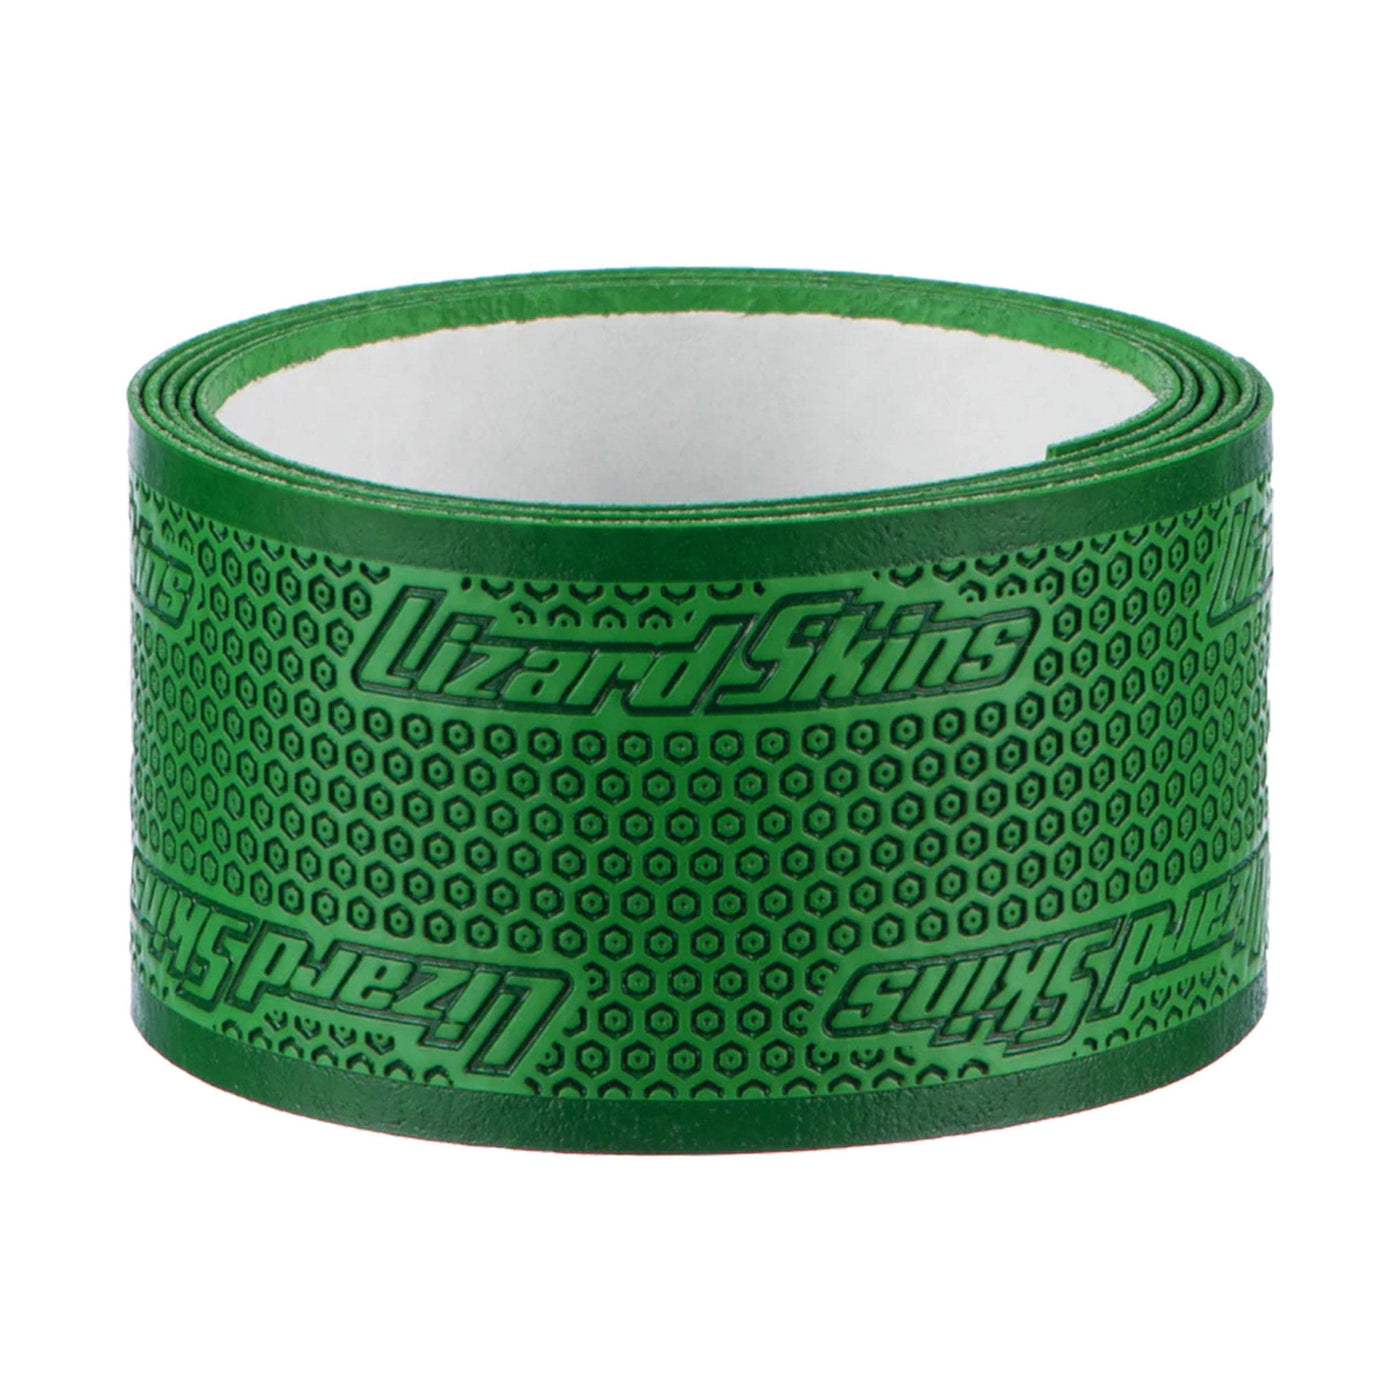 Lizard Skins Solid Hockey Grip Tape - 99cm - The Hockey Shop Source For Sports